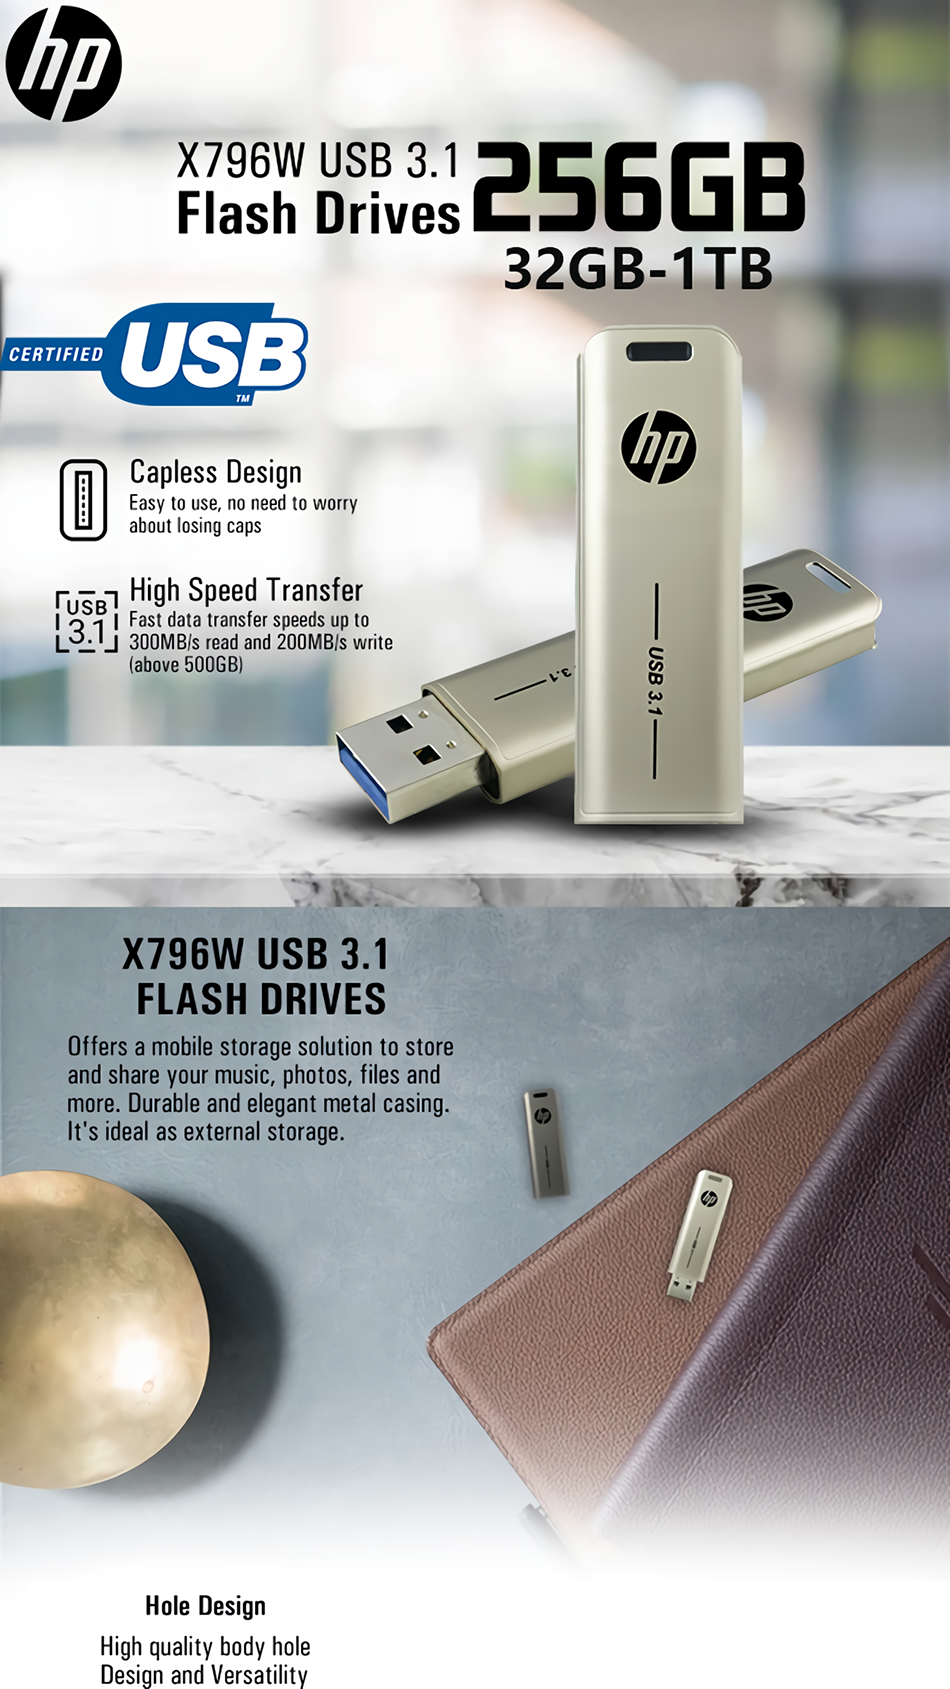 HP-USB31-Flash-Drive-Push-pull-Pendrive-Max-300MBs-512G-256G-128G-64GB-for-Laptop-PC-Media-player-Ce-1955856-1